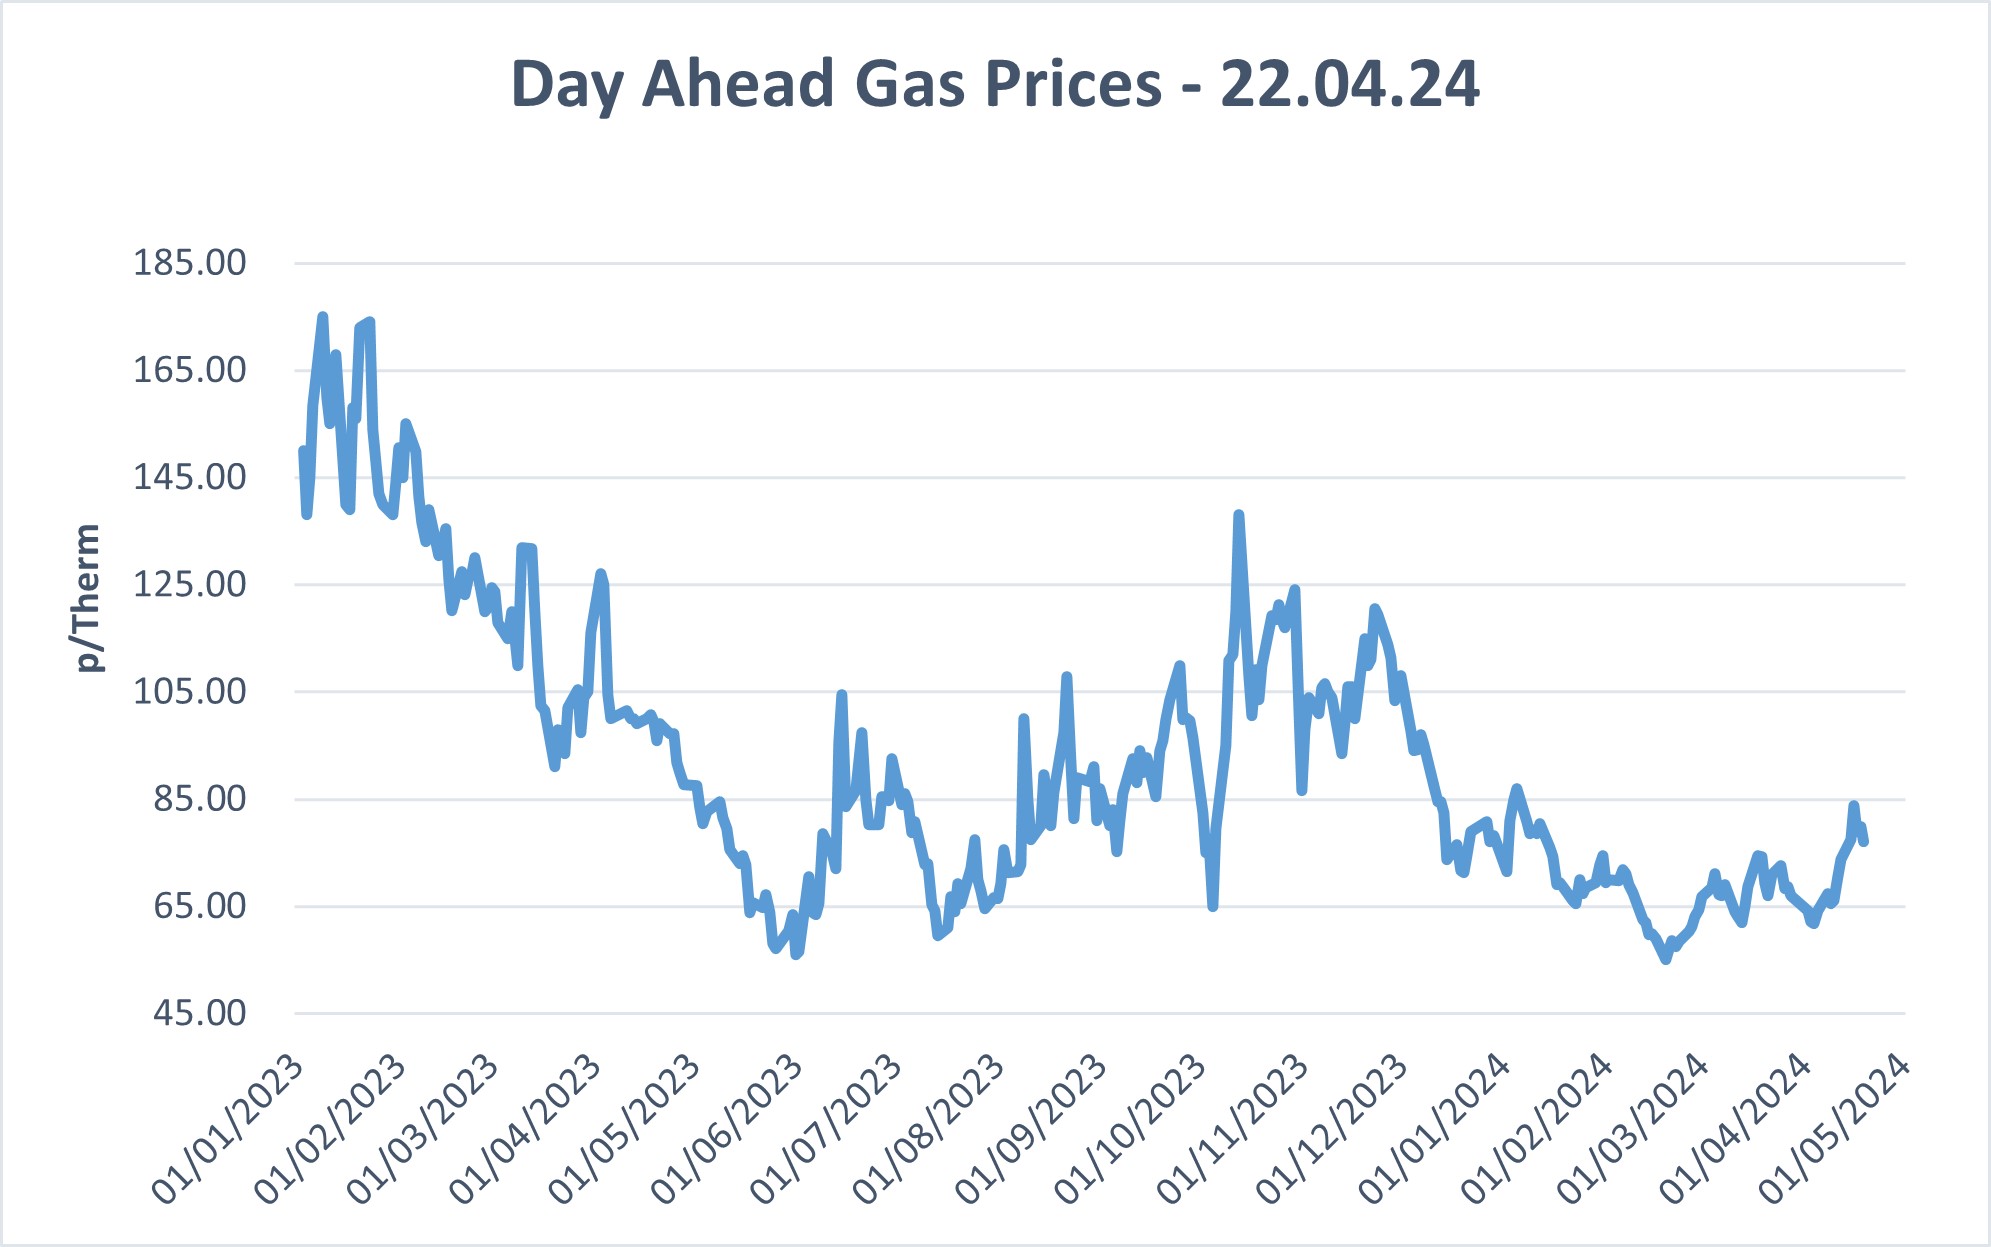 wholesale gas prices Day ahead 22.04.24